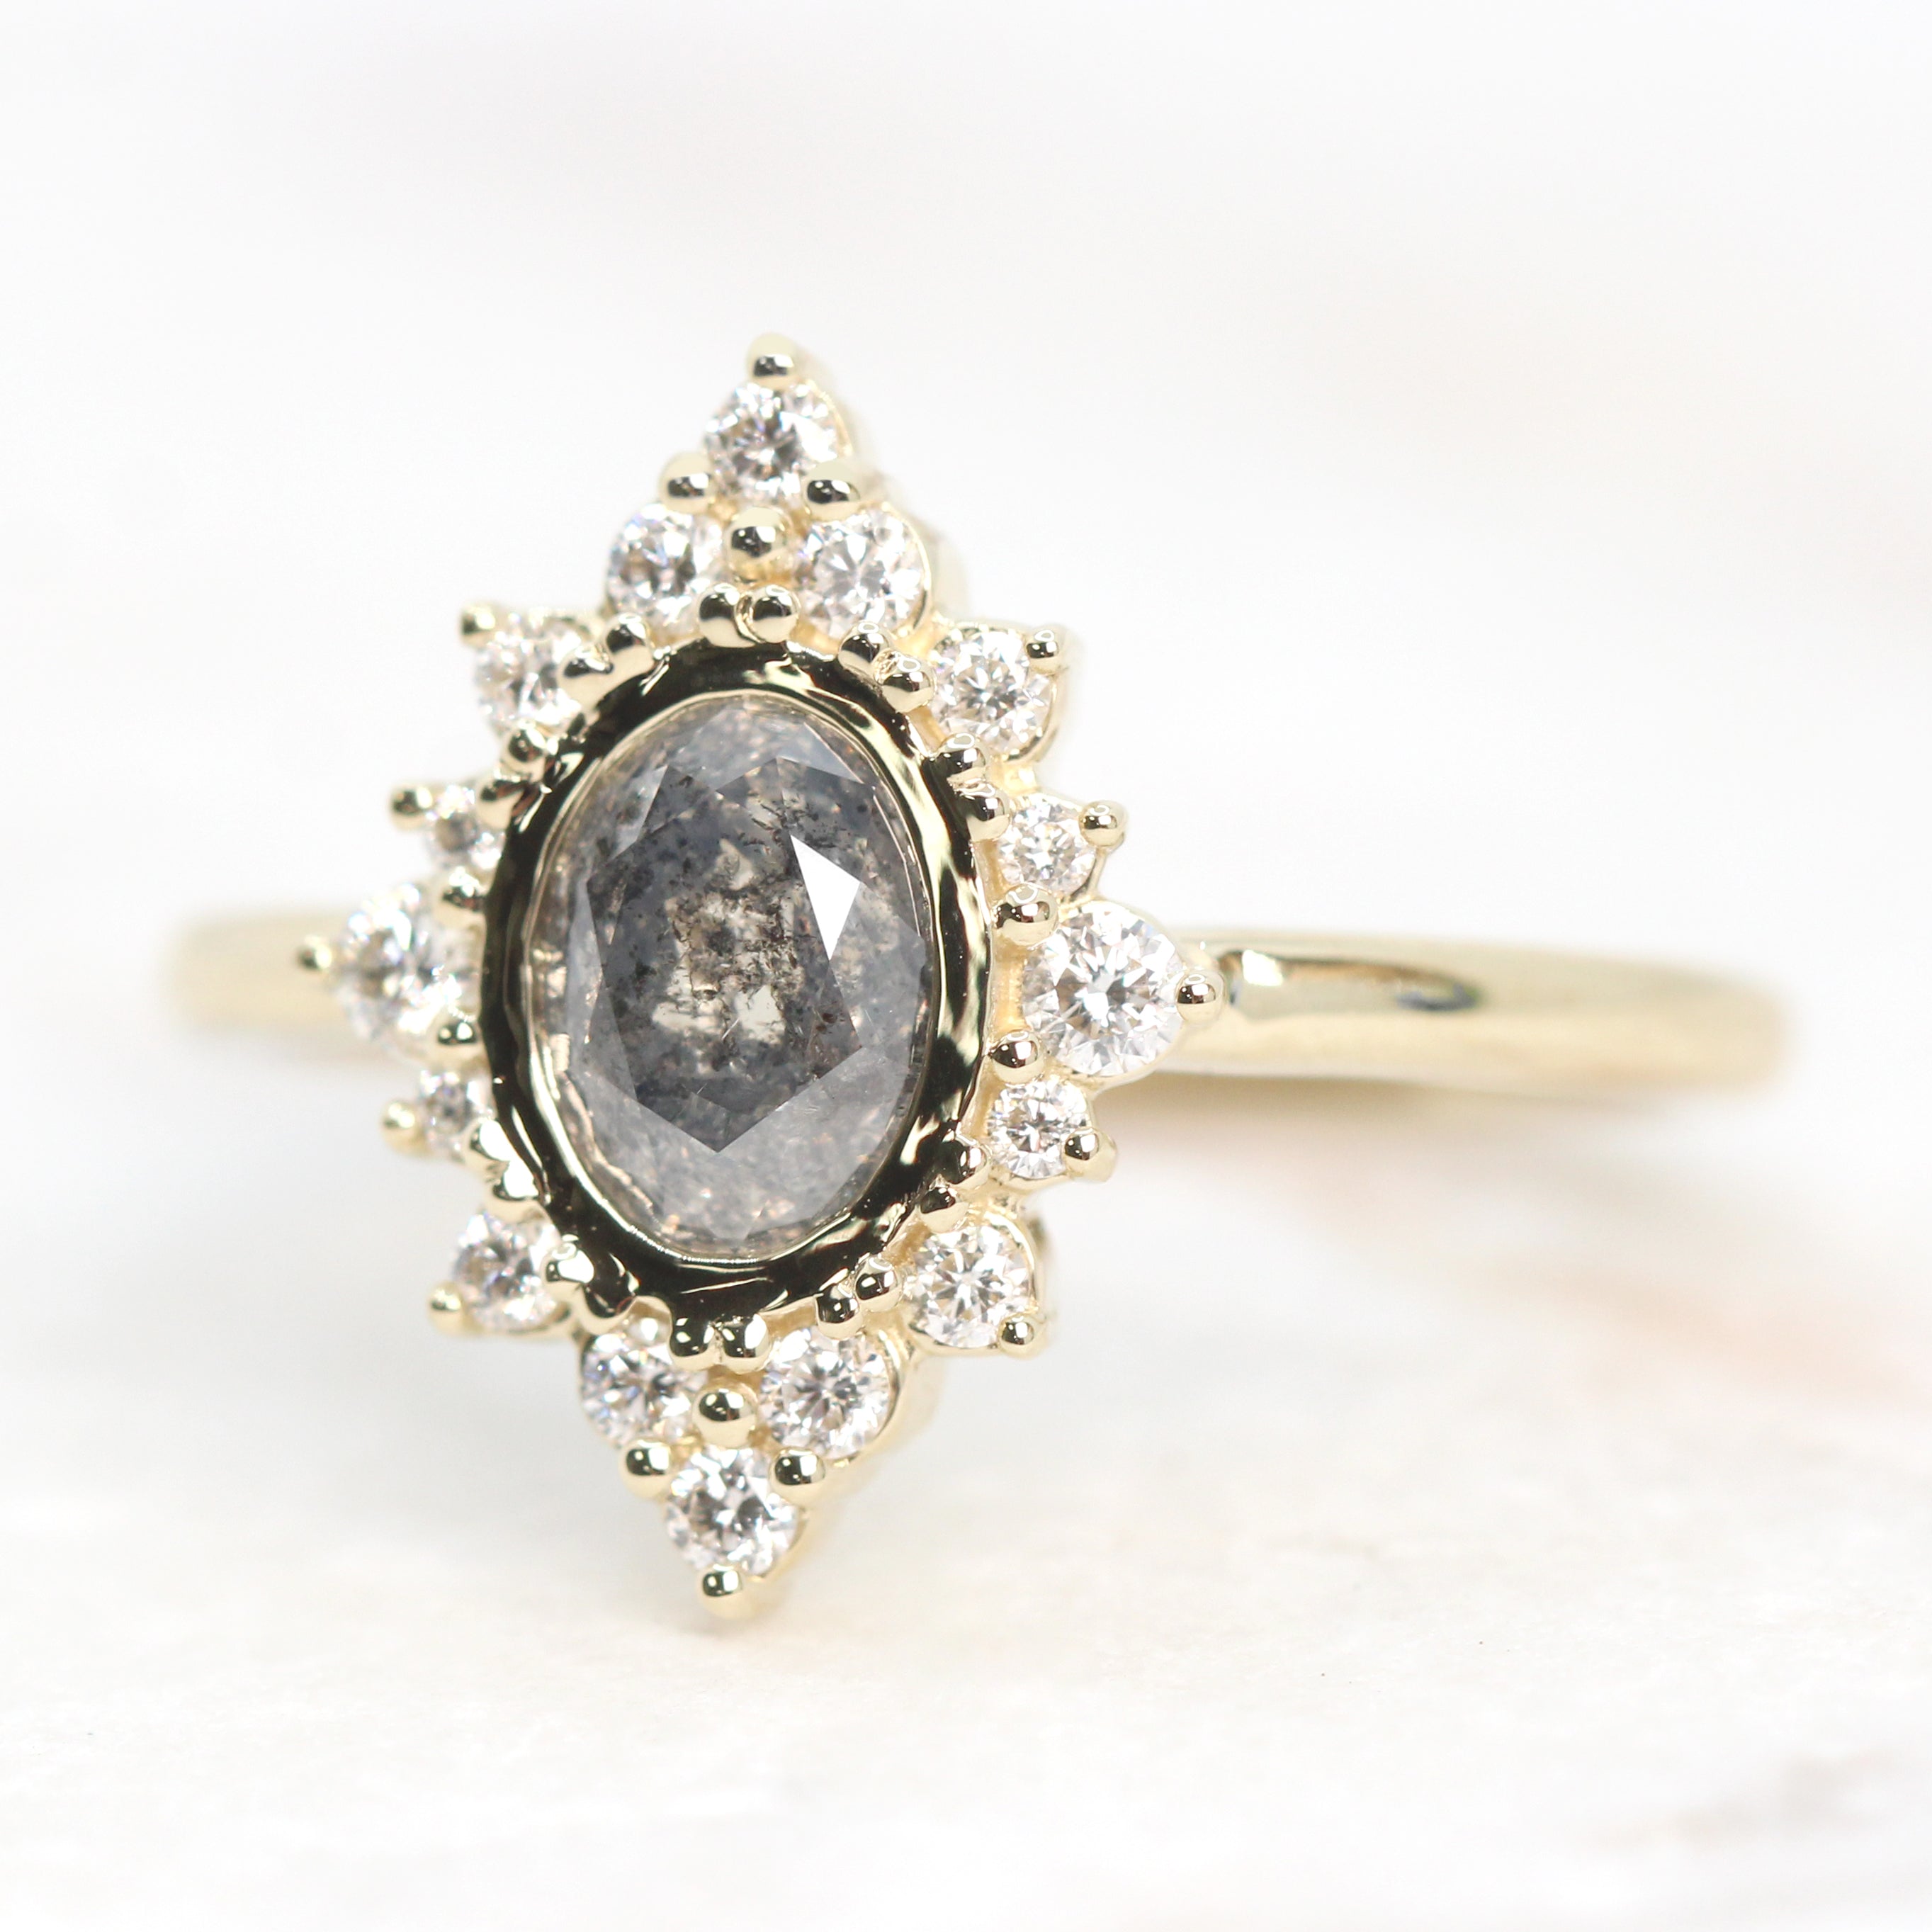 Estrella Ring with a 1.04 Carat Dark Gray Oval Celestial Diamond and White Accent Diamonds in 14k Yellow Gold - Ready to Size and Ship - Midwinter Co. Alternative Bridal Rings and Modern Fine Jewelry